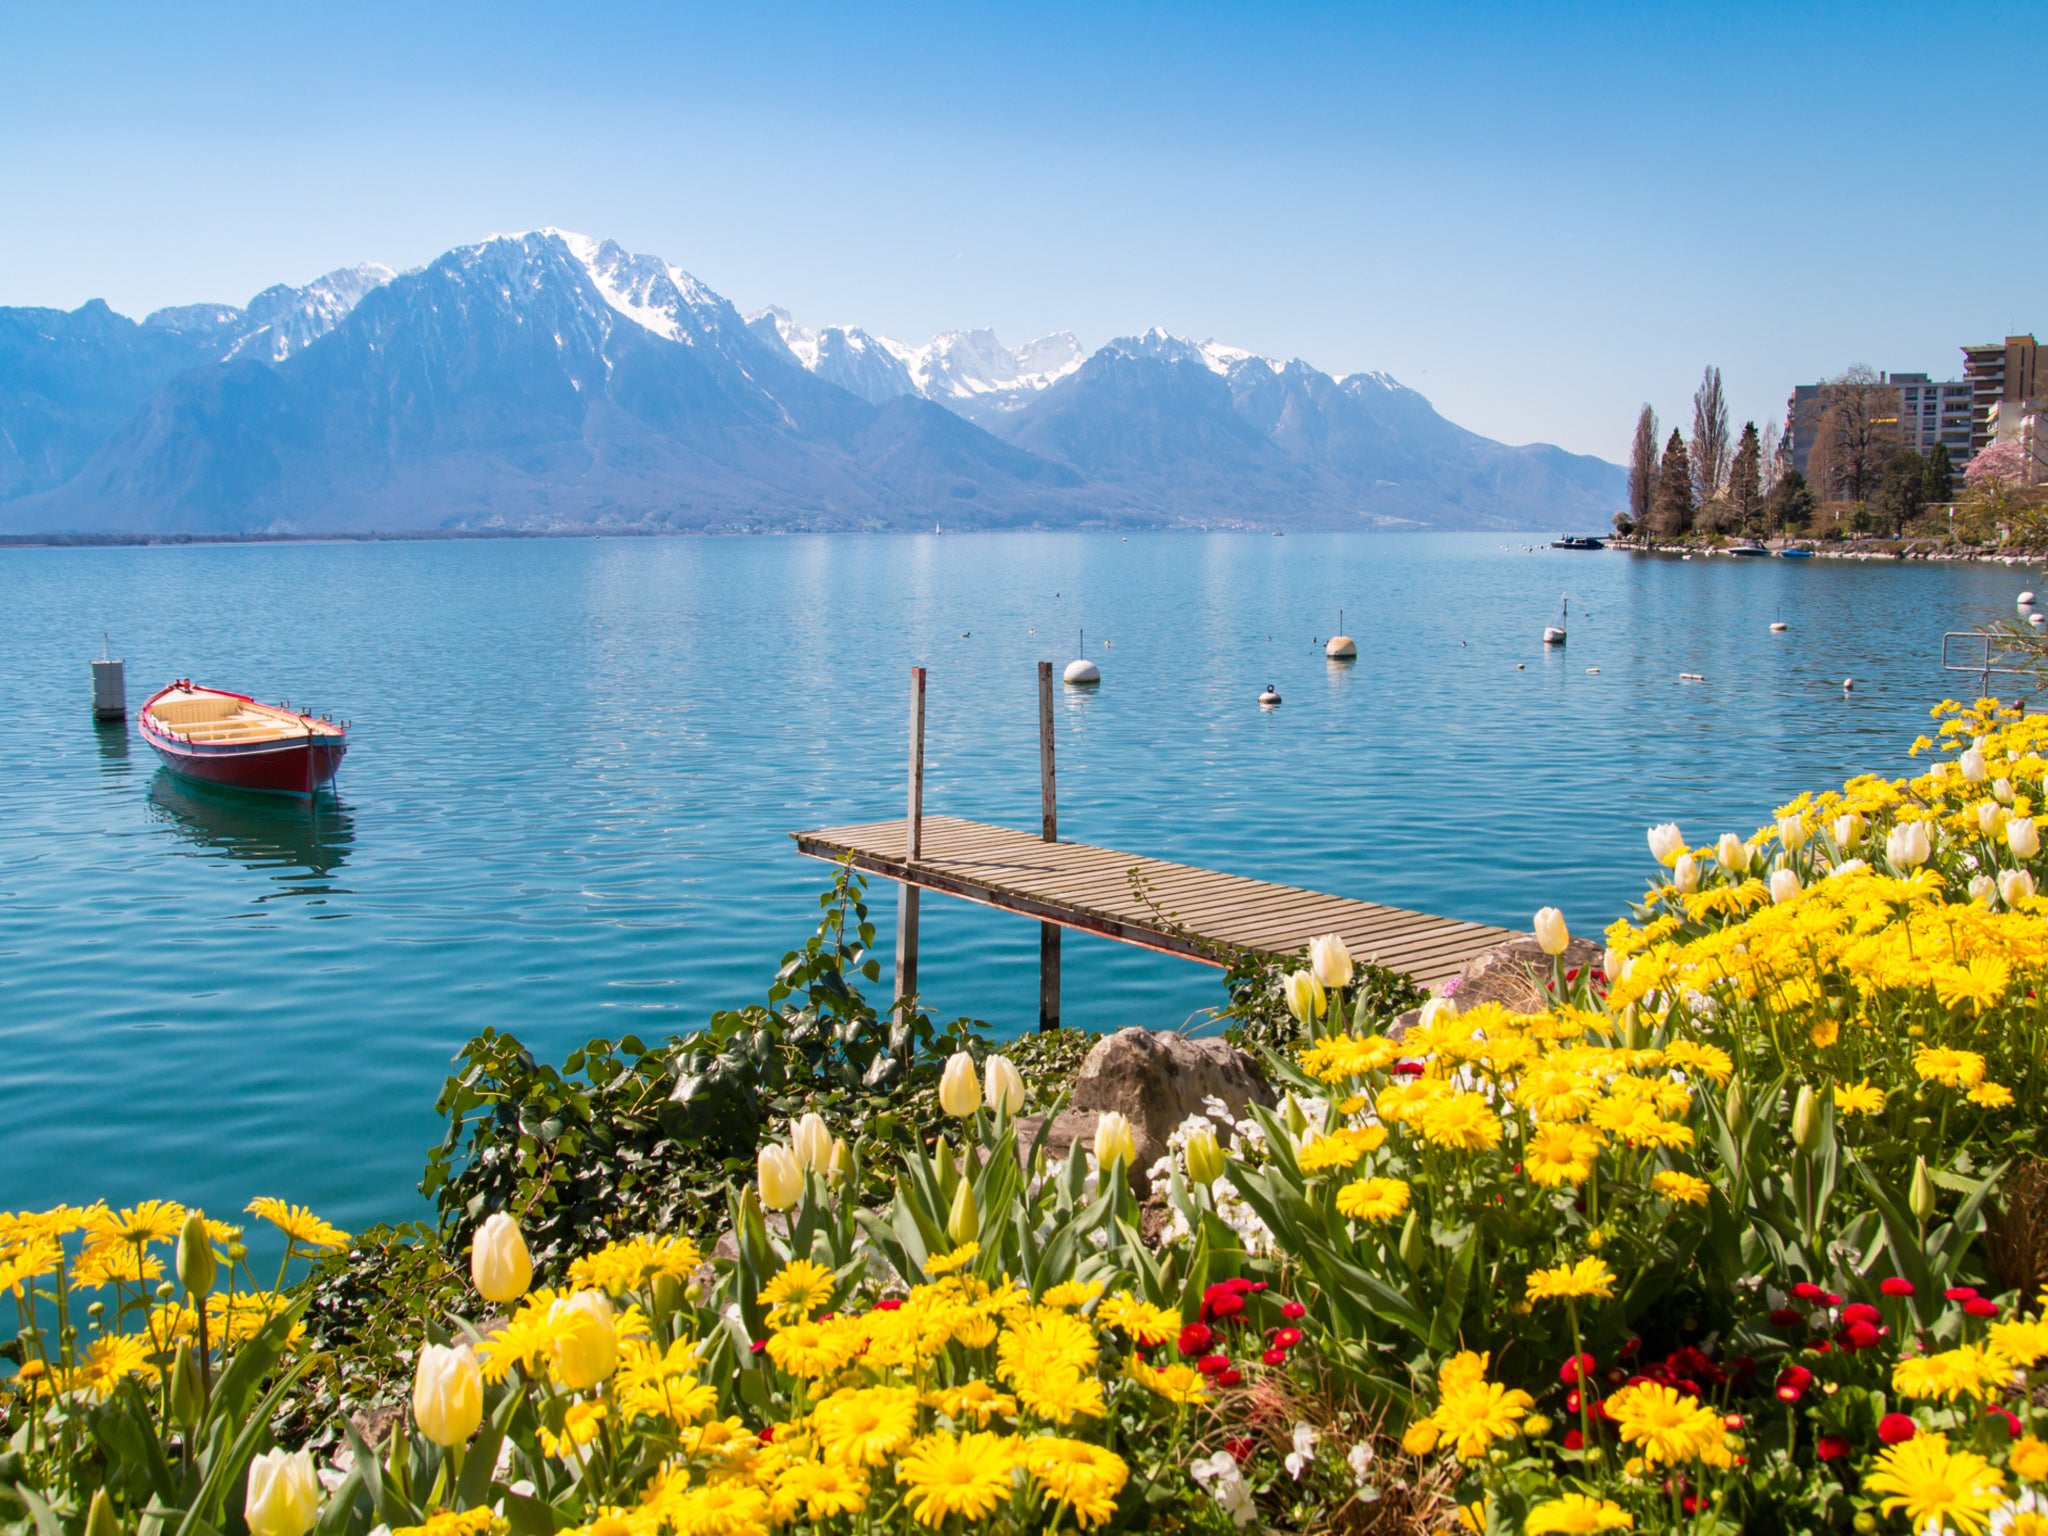 Montreux offers an idyllic view of the Swiss Alps